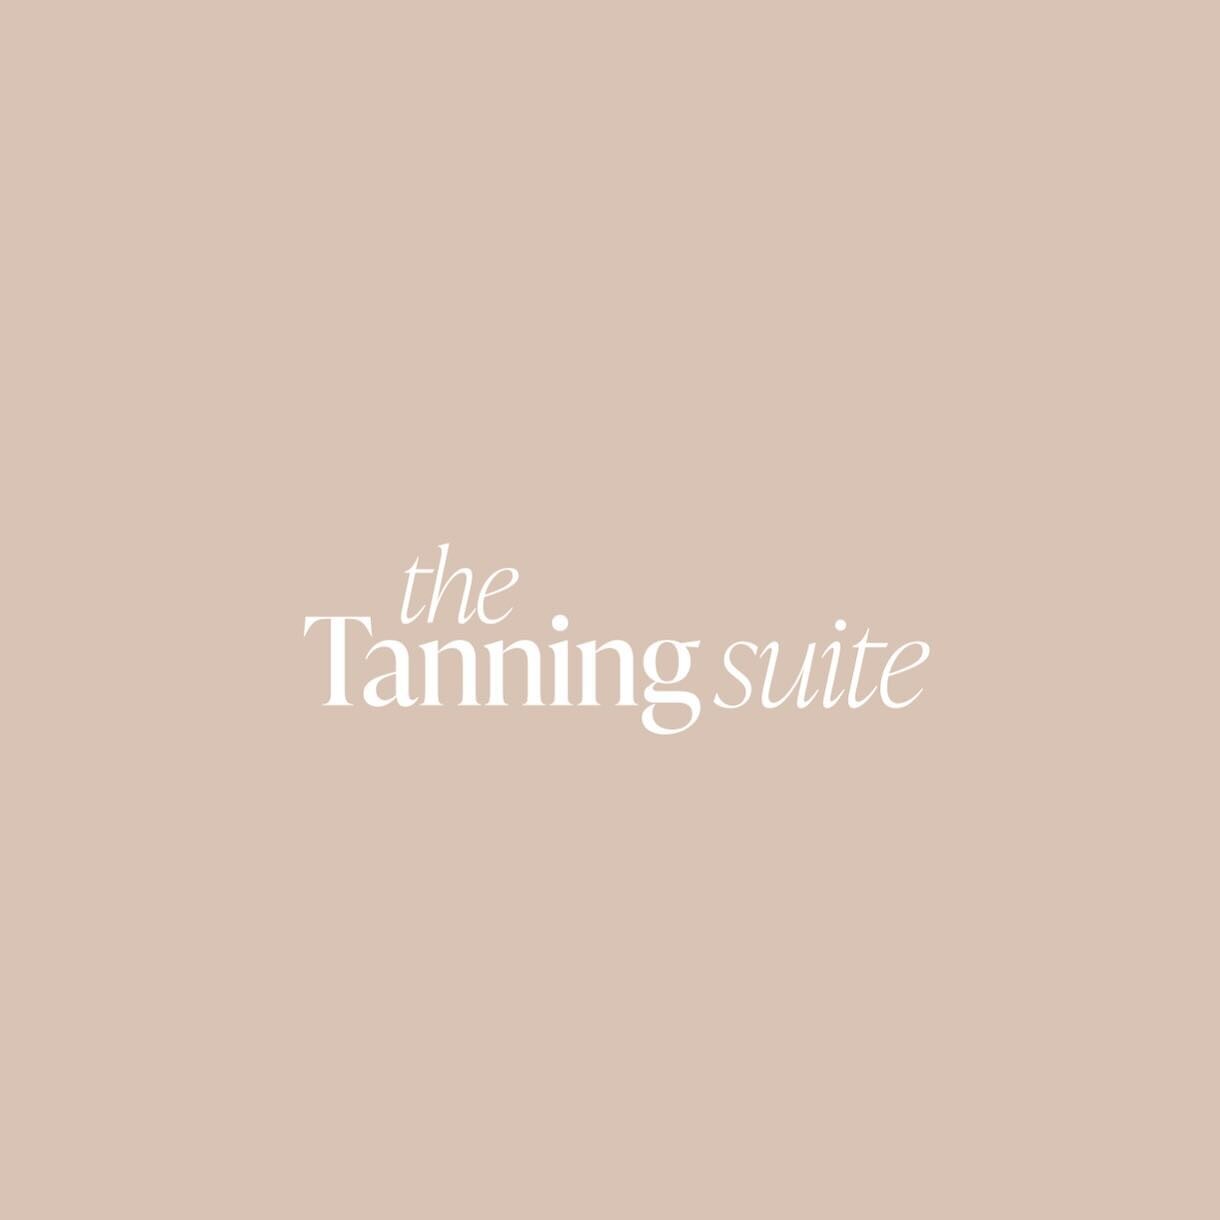 Logo design for new sunbed shop The Tanning Suite, opening soon ☀️👙 @thetanningsuite_